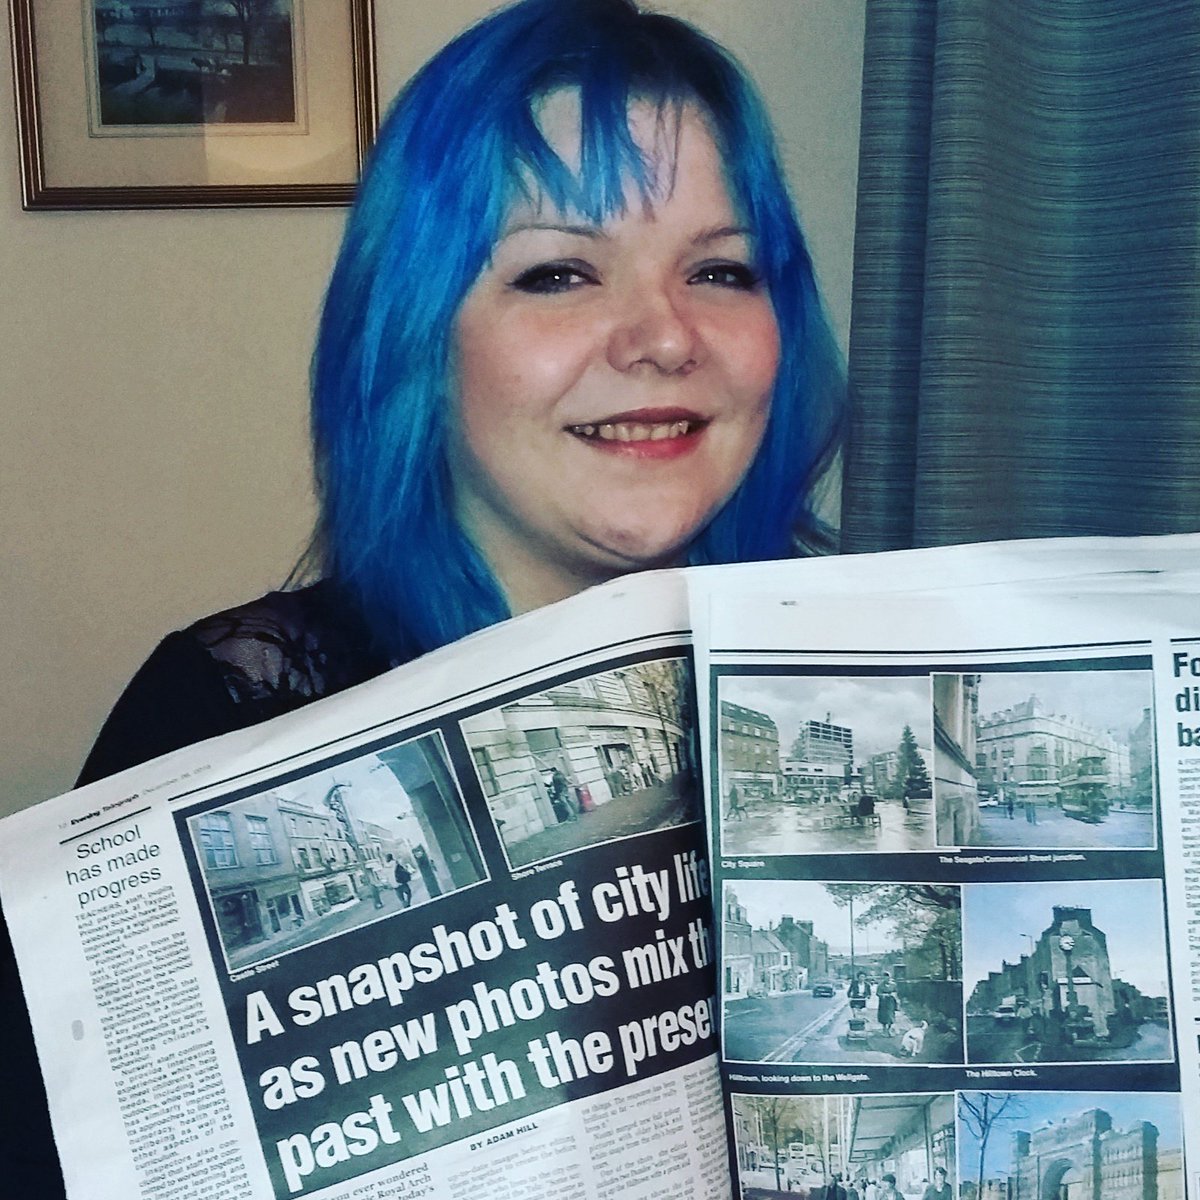 My photography project made the local papers, fame at last! #eveningtelegraph #photography #photobook #retro #dundee @DJCAD @dundeeuni